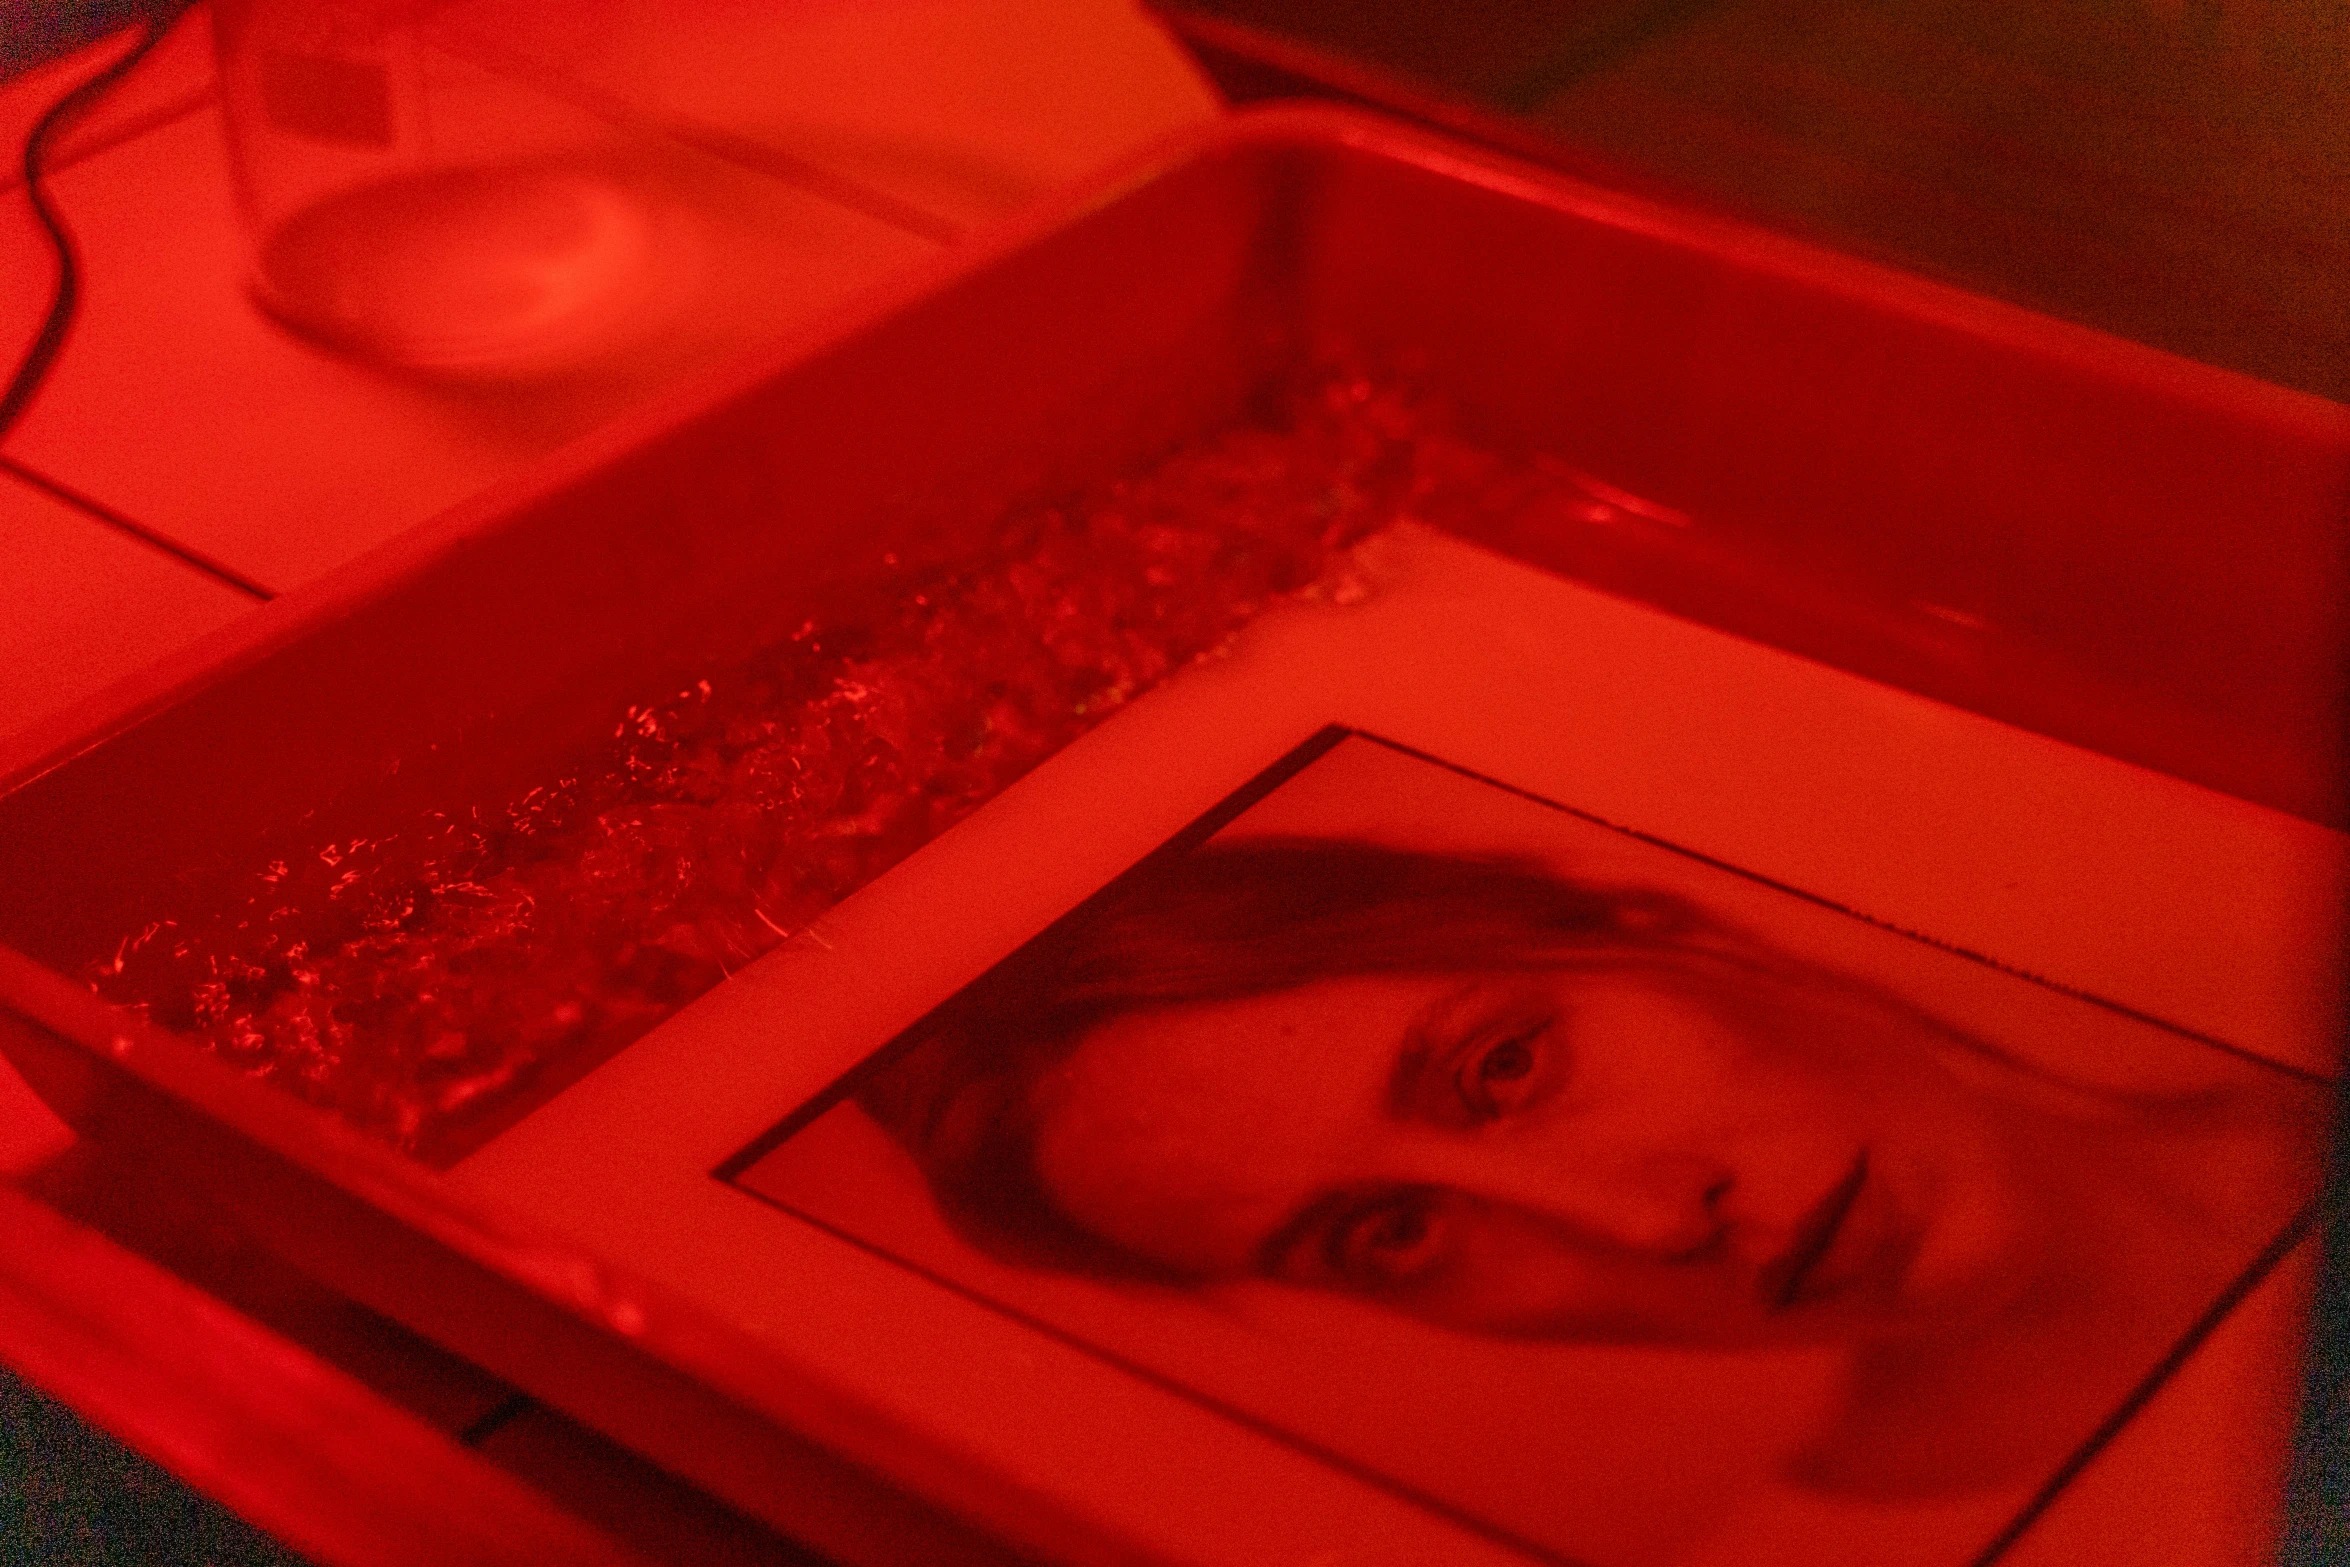 a box with a picture of a woman in it, pexels, process art, red led lights, in a red dish, bio-luminescence, gelatin silver process